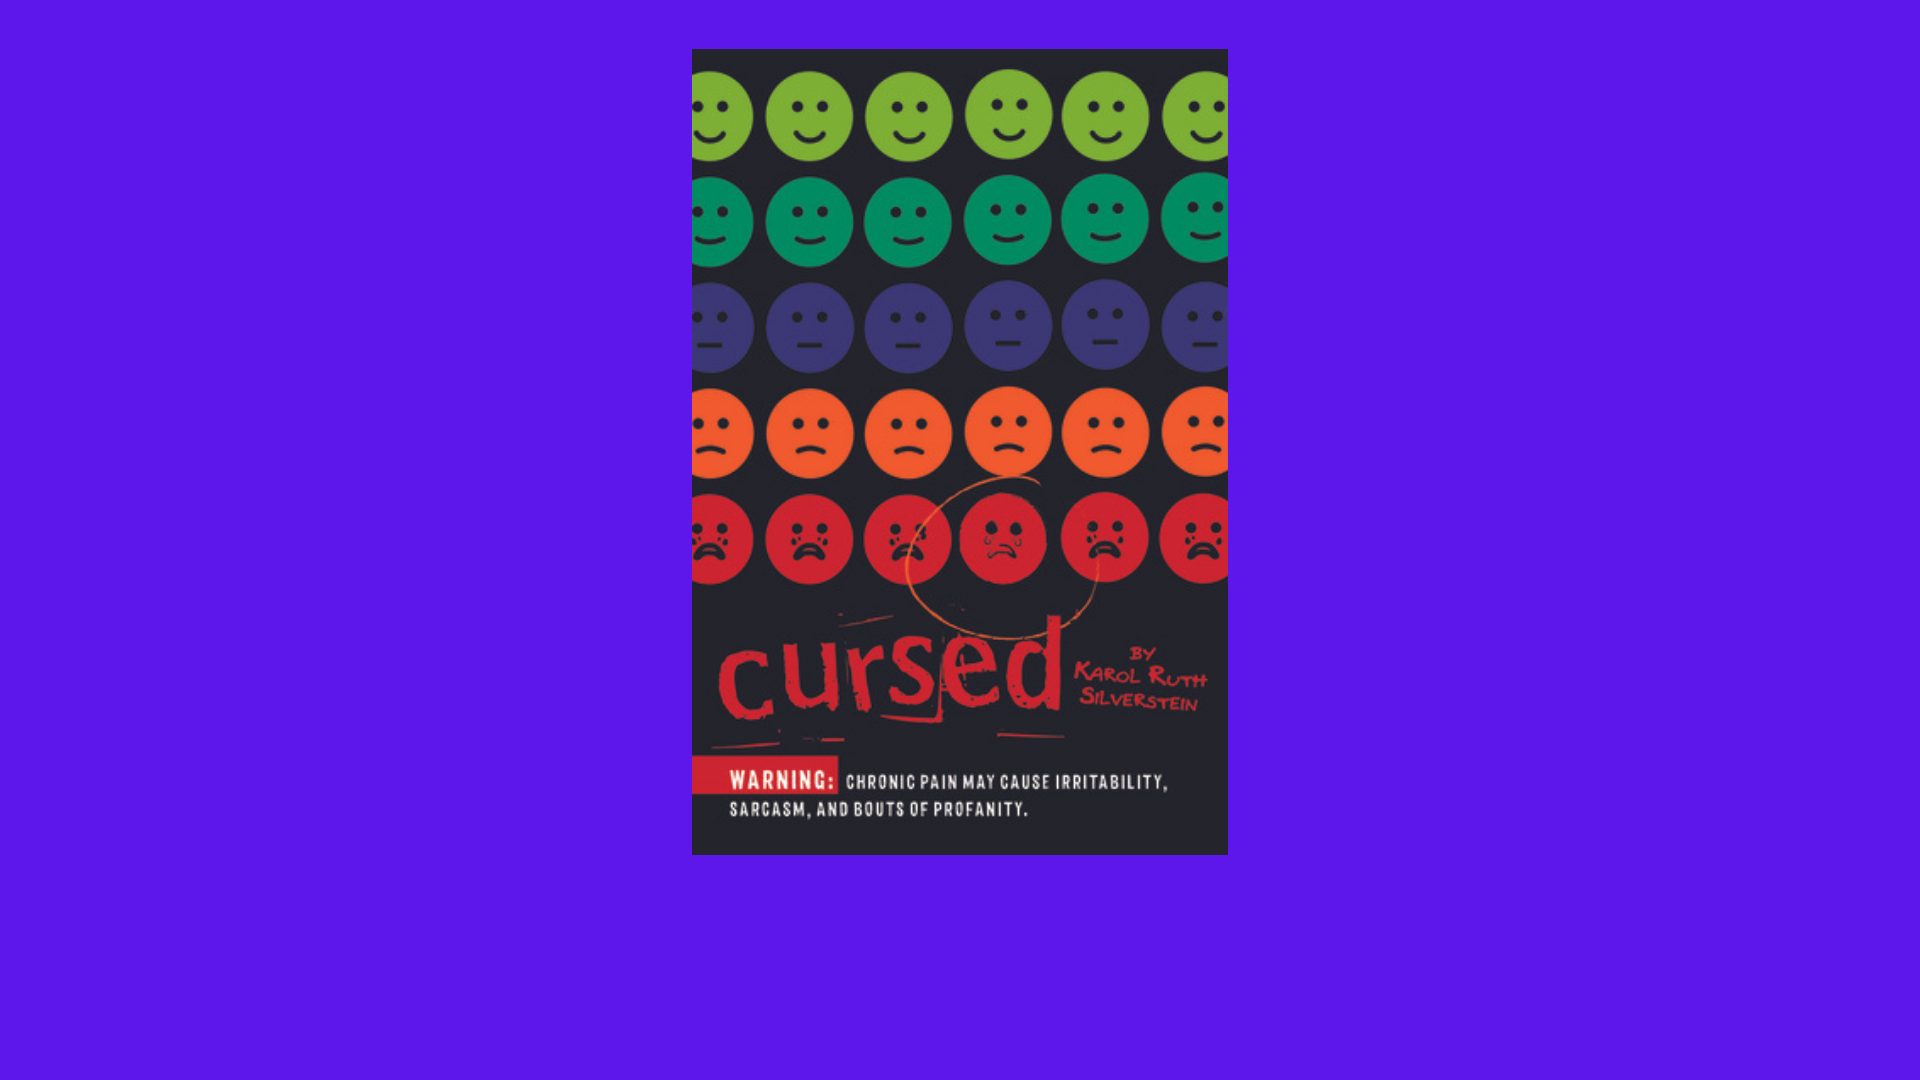 Image of the "Cursed" book cover